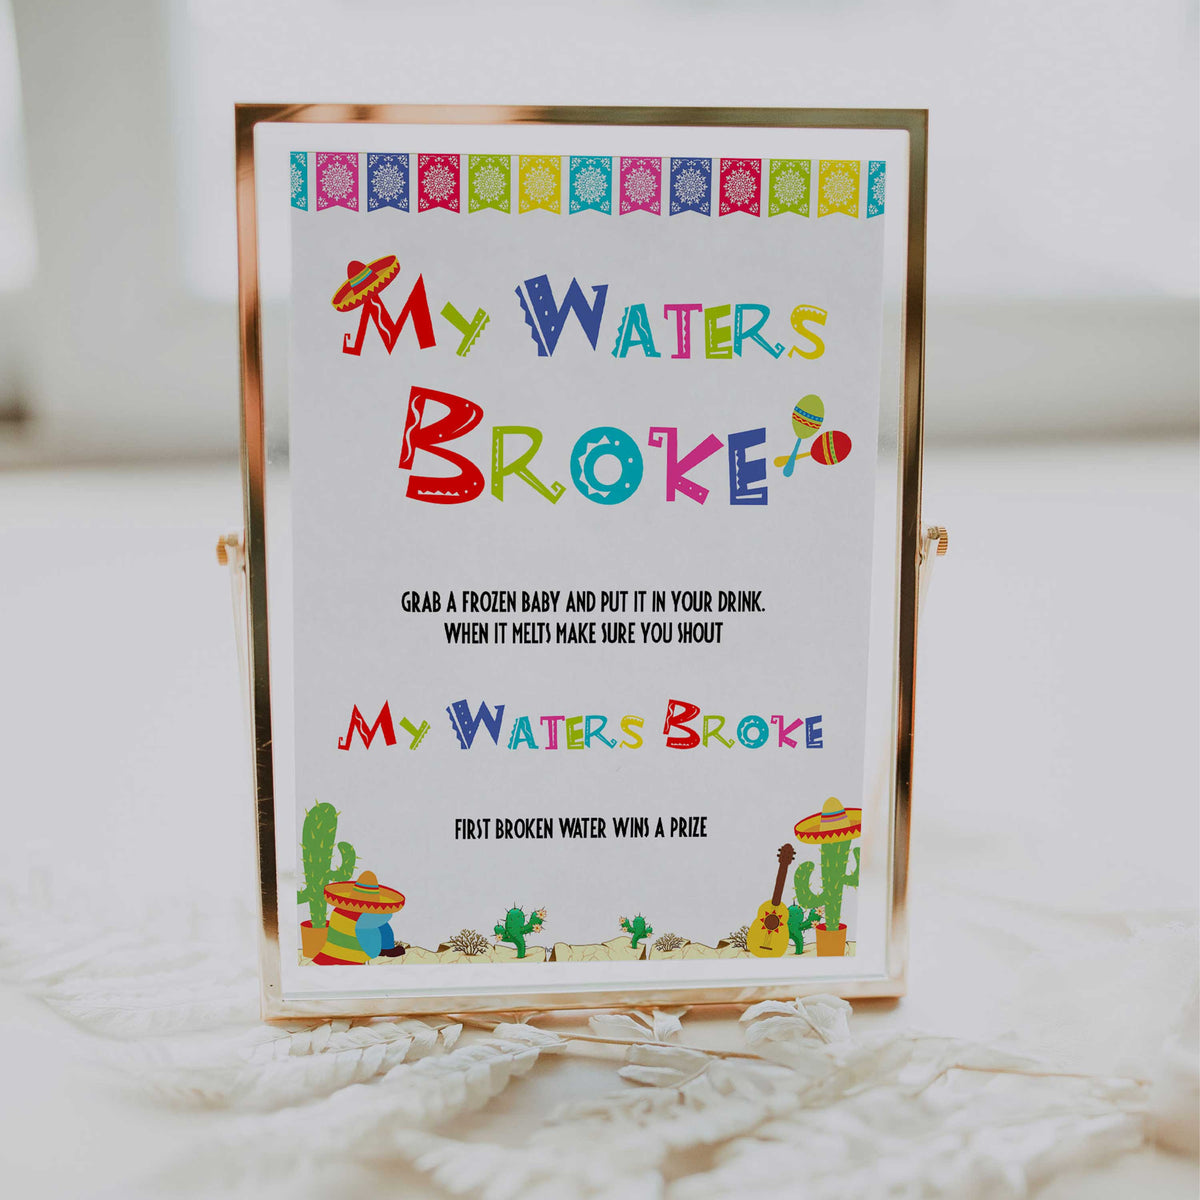 my waters broke game, baby ice cube game, Printable baby shower games, Mexican fiesta fun baby games, baby shower games, fun baby shower ideas, top baby shower ideas, fiesta shower baby shower, fiesta baby shower ideas